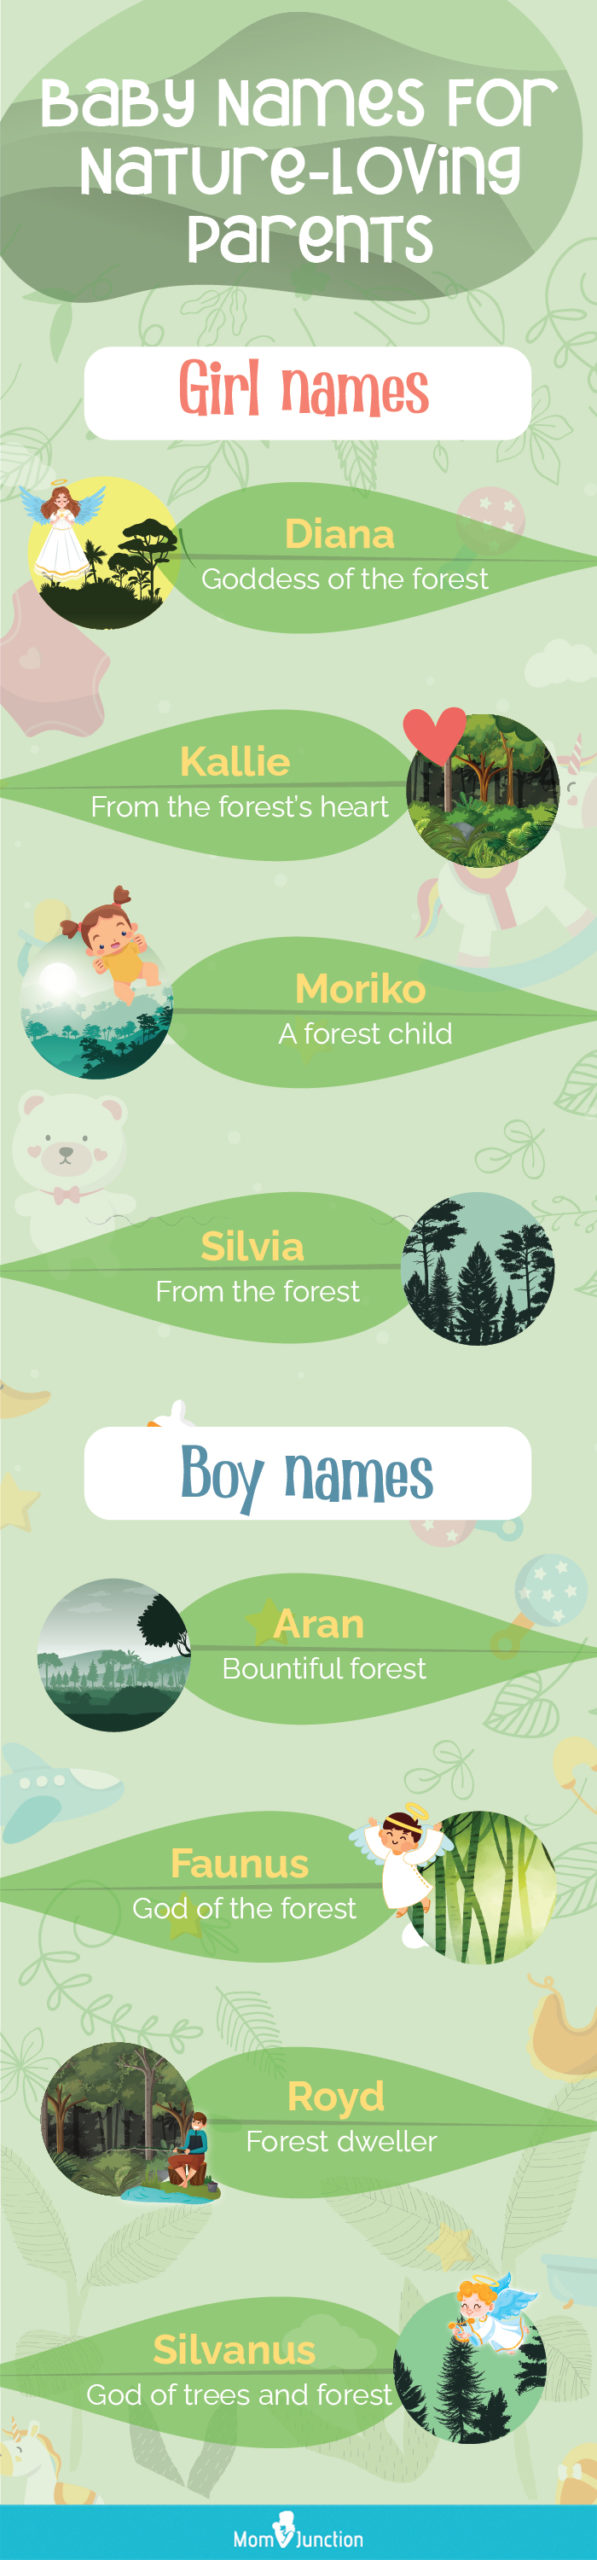 baby names for nature loving parents [infographic]